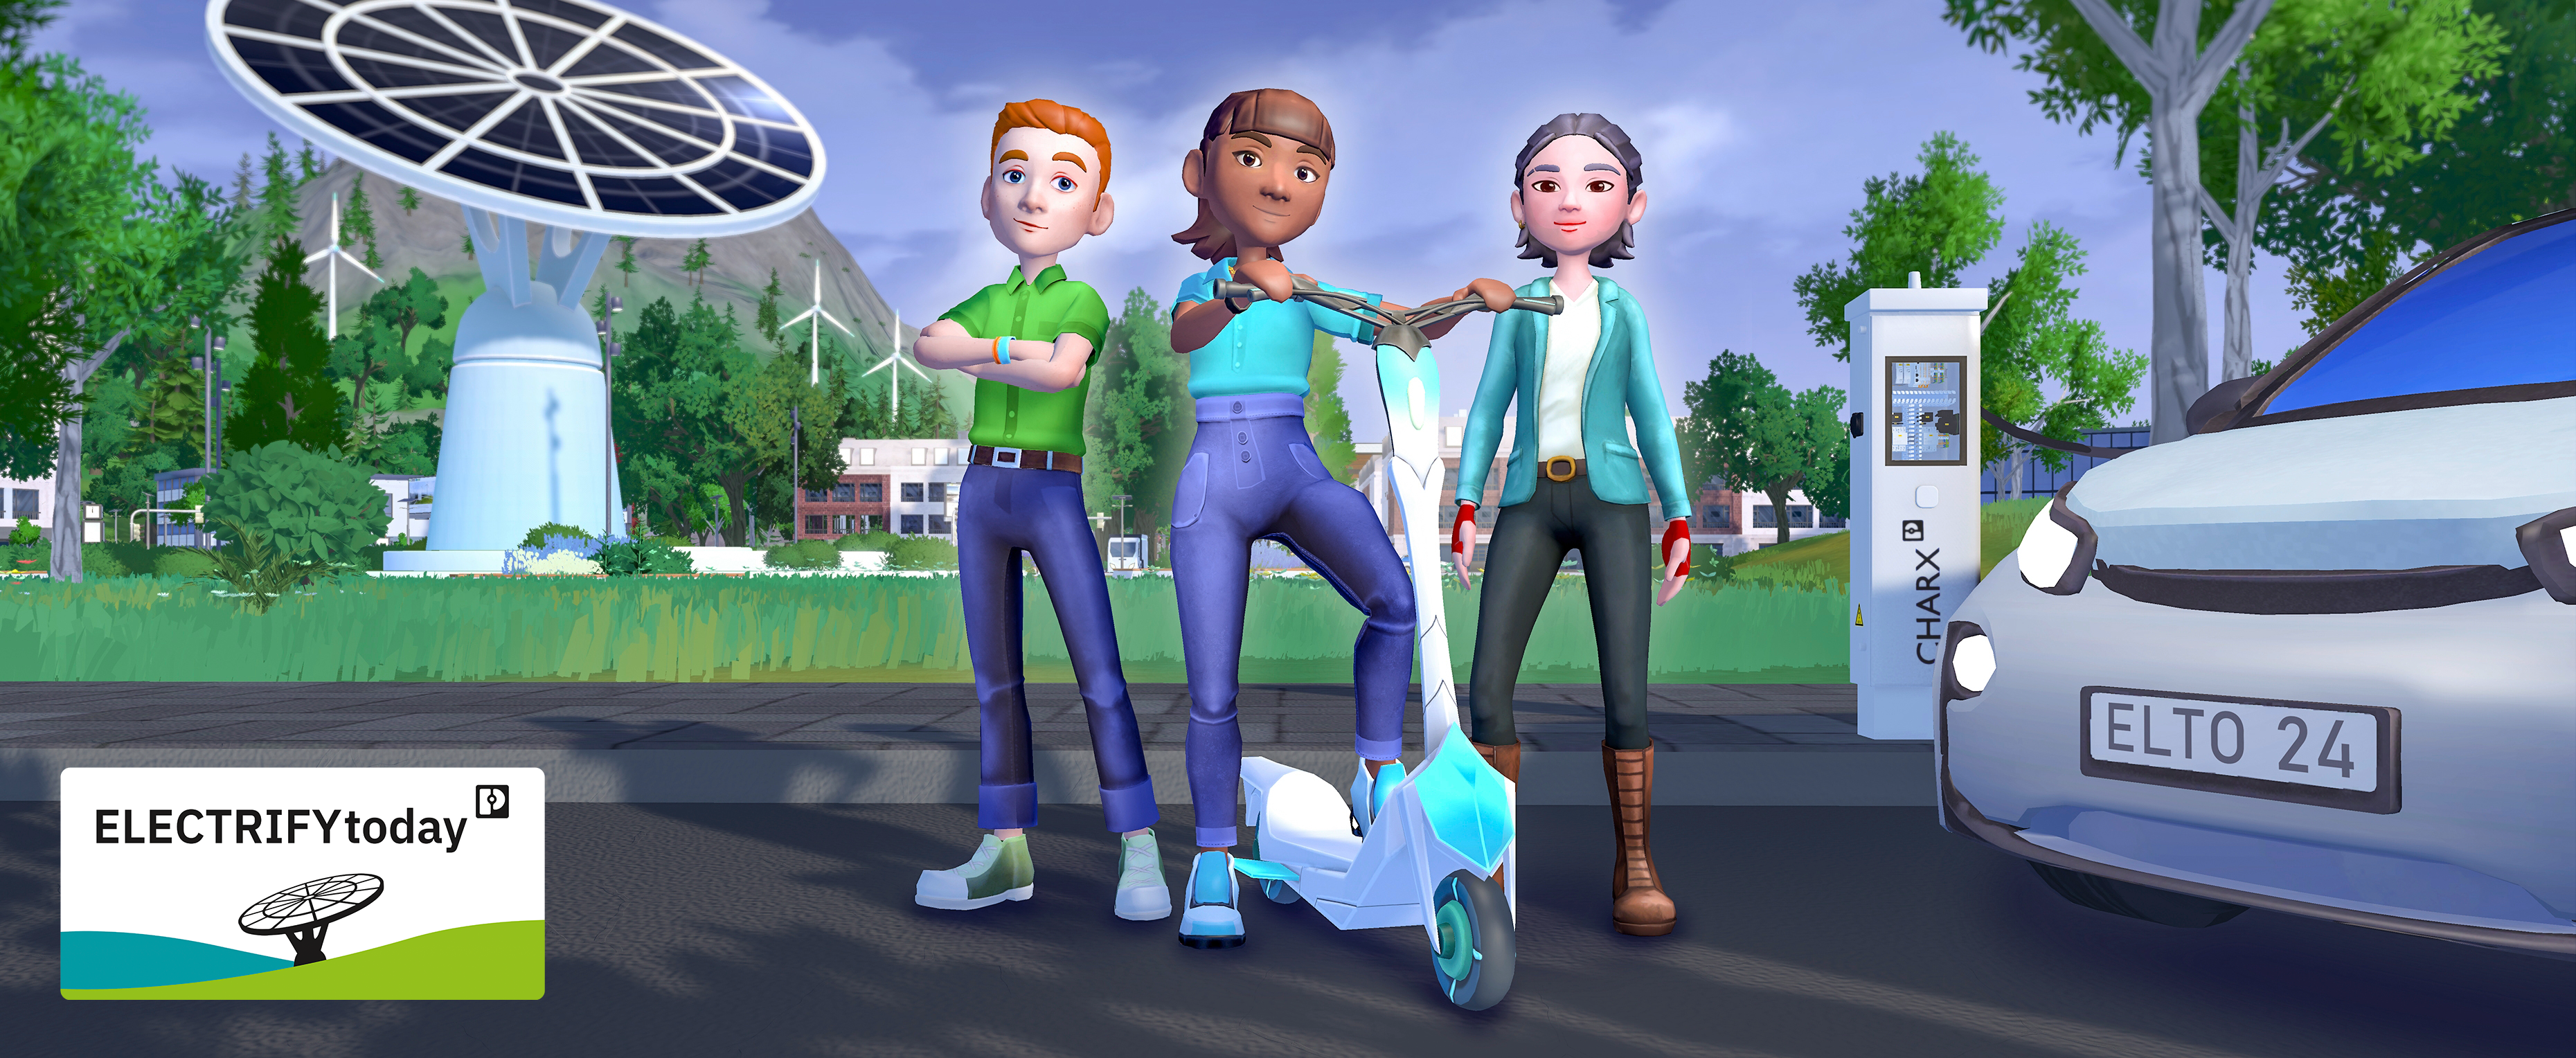 ELECTRIFYtoday: Serious Game for learners and teachers on the energy transition